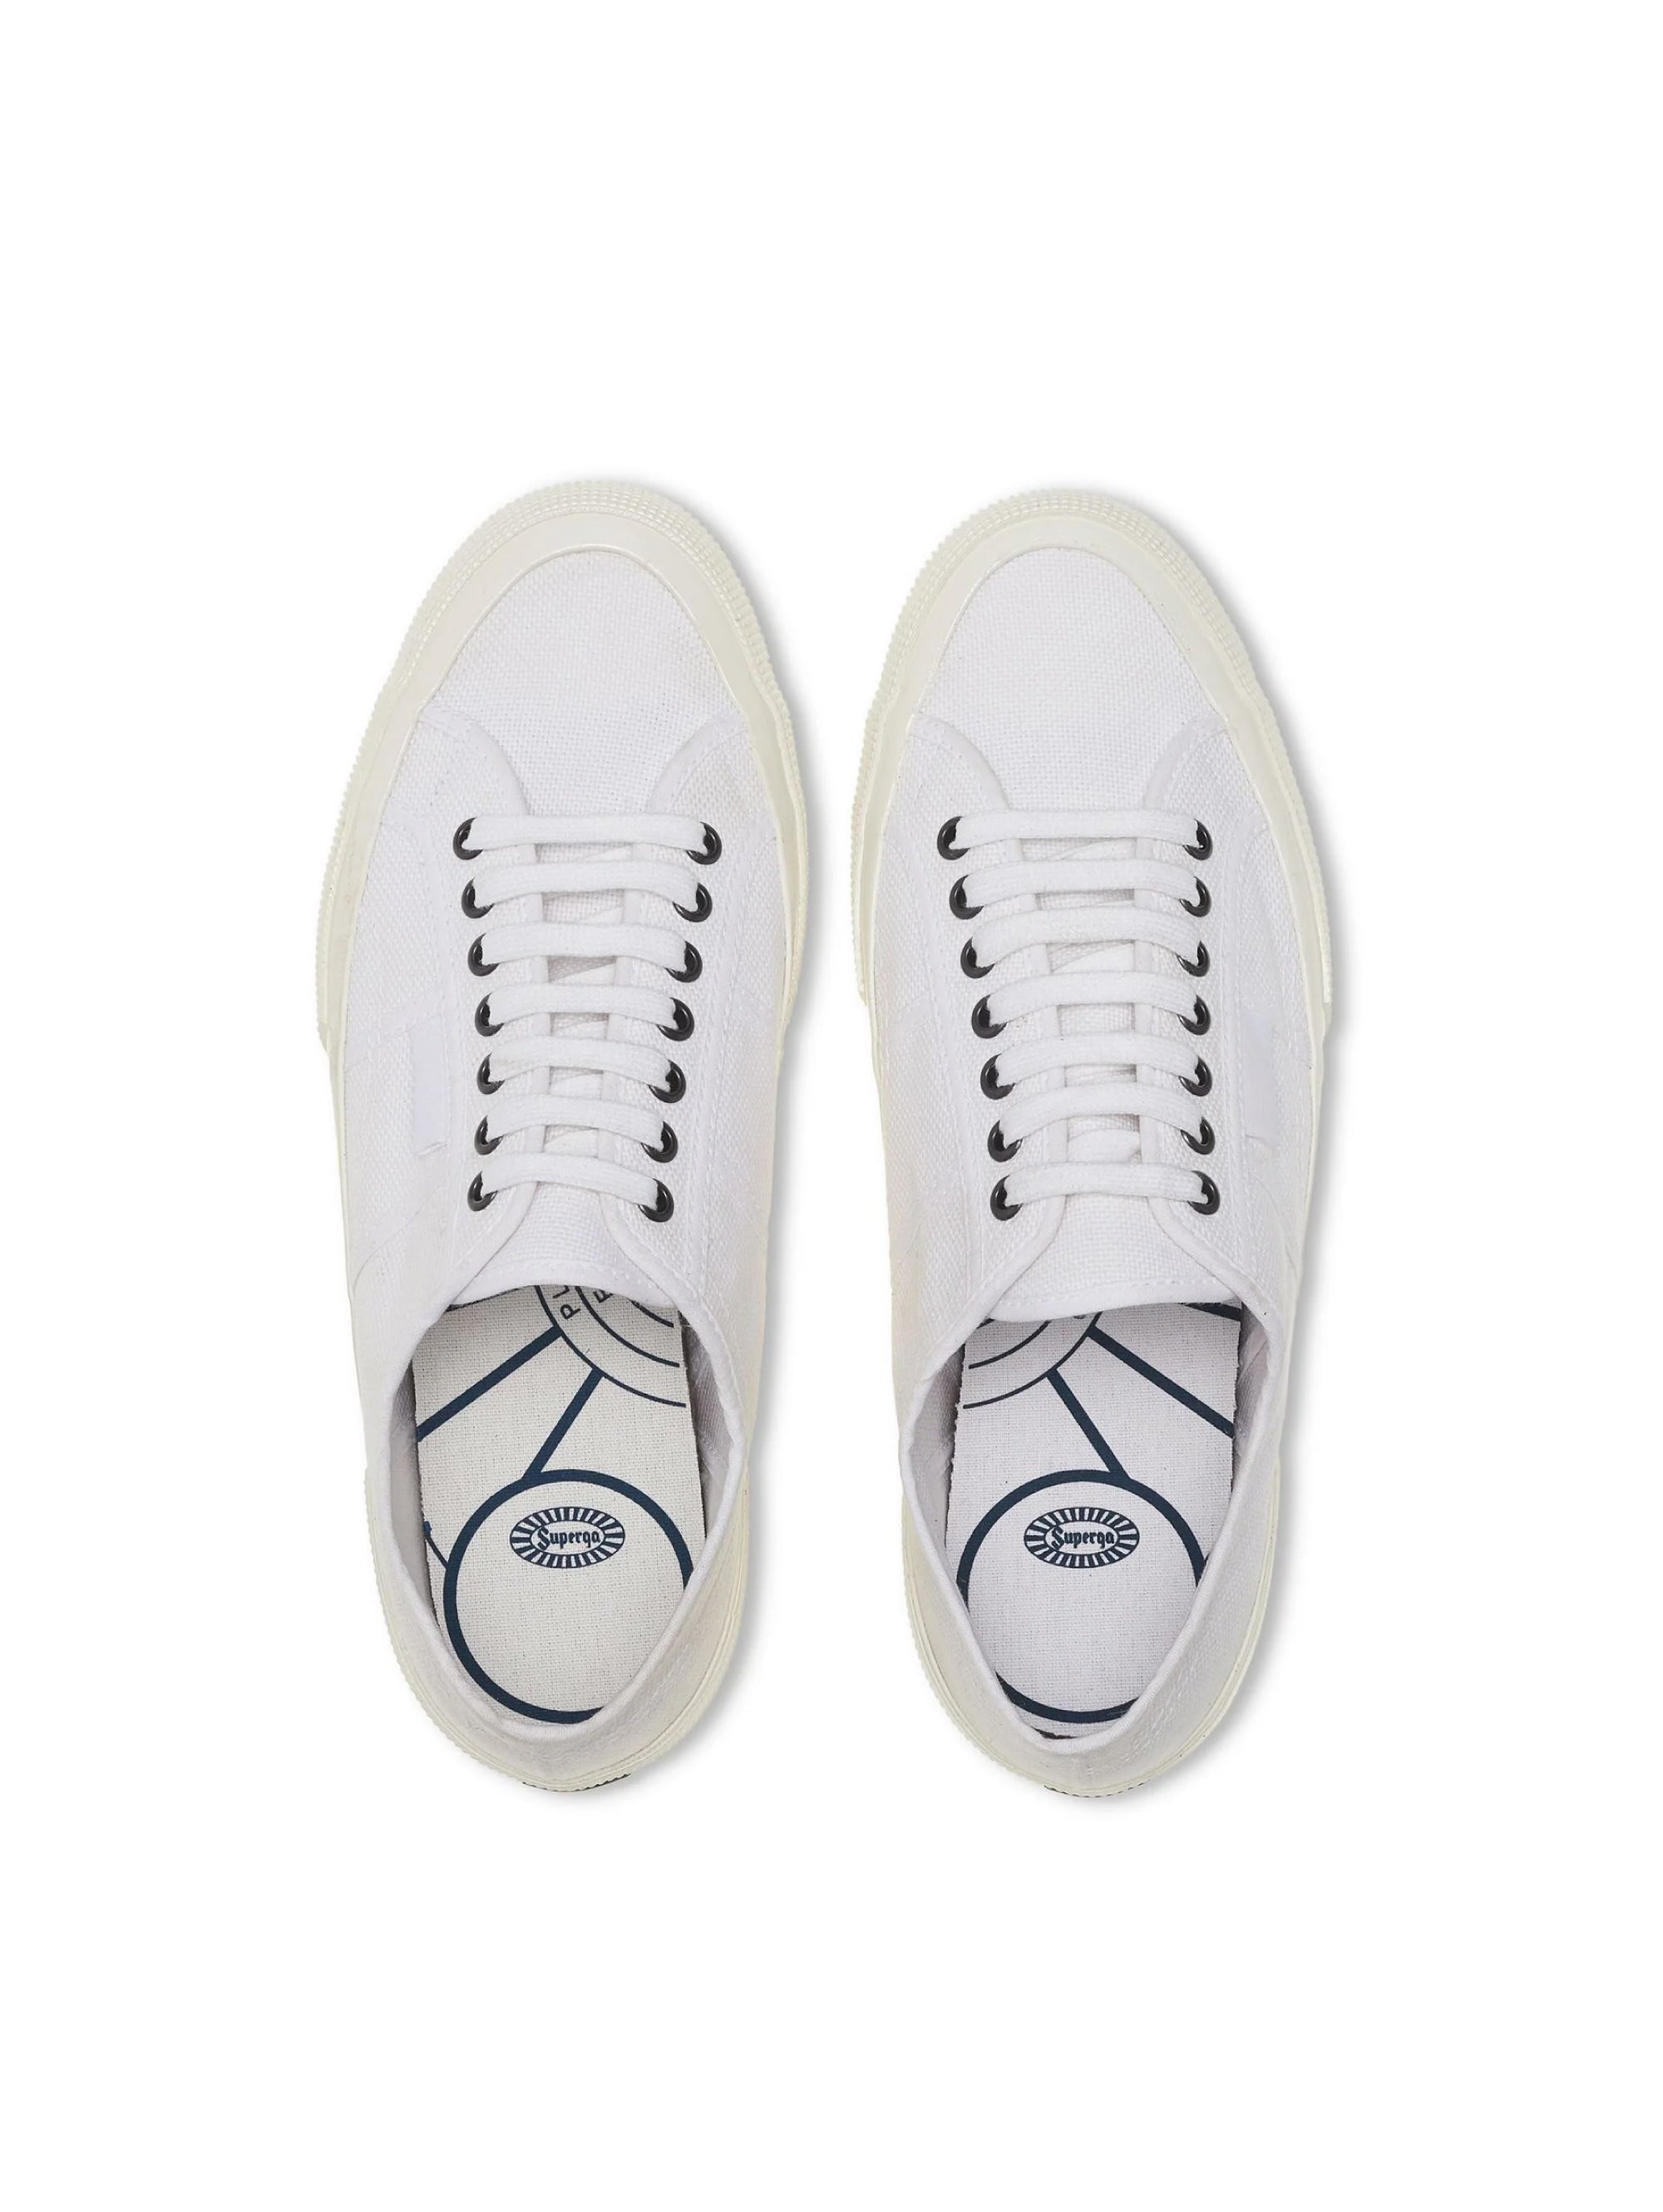 Archive Low Sneakers in White Cotton